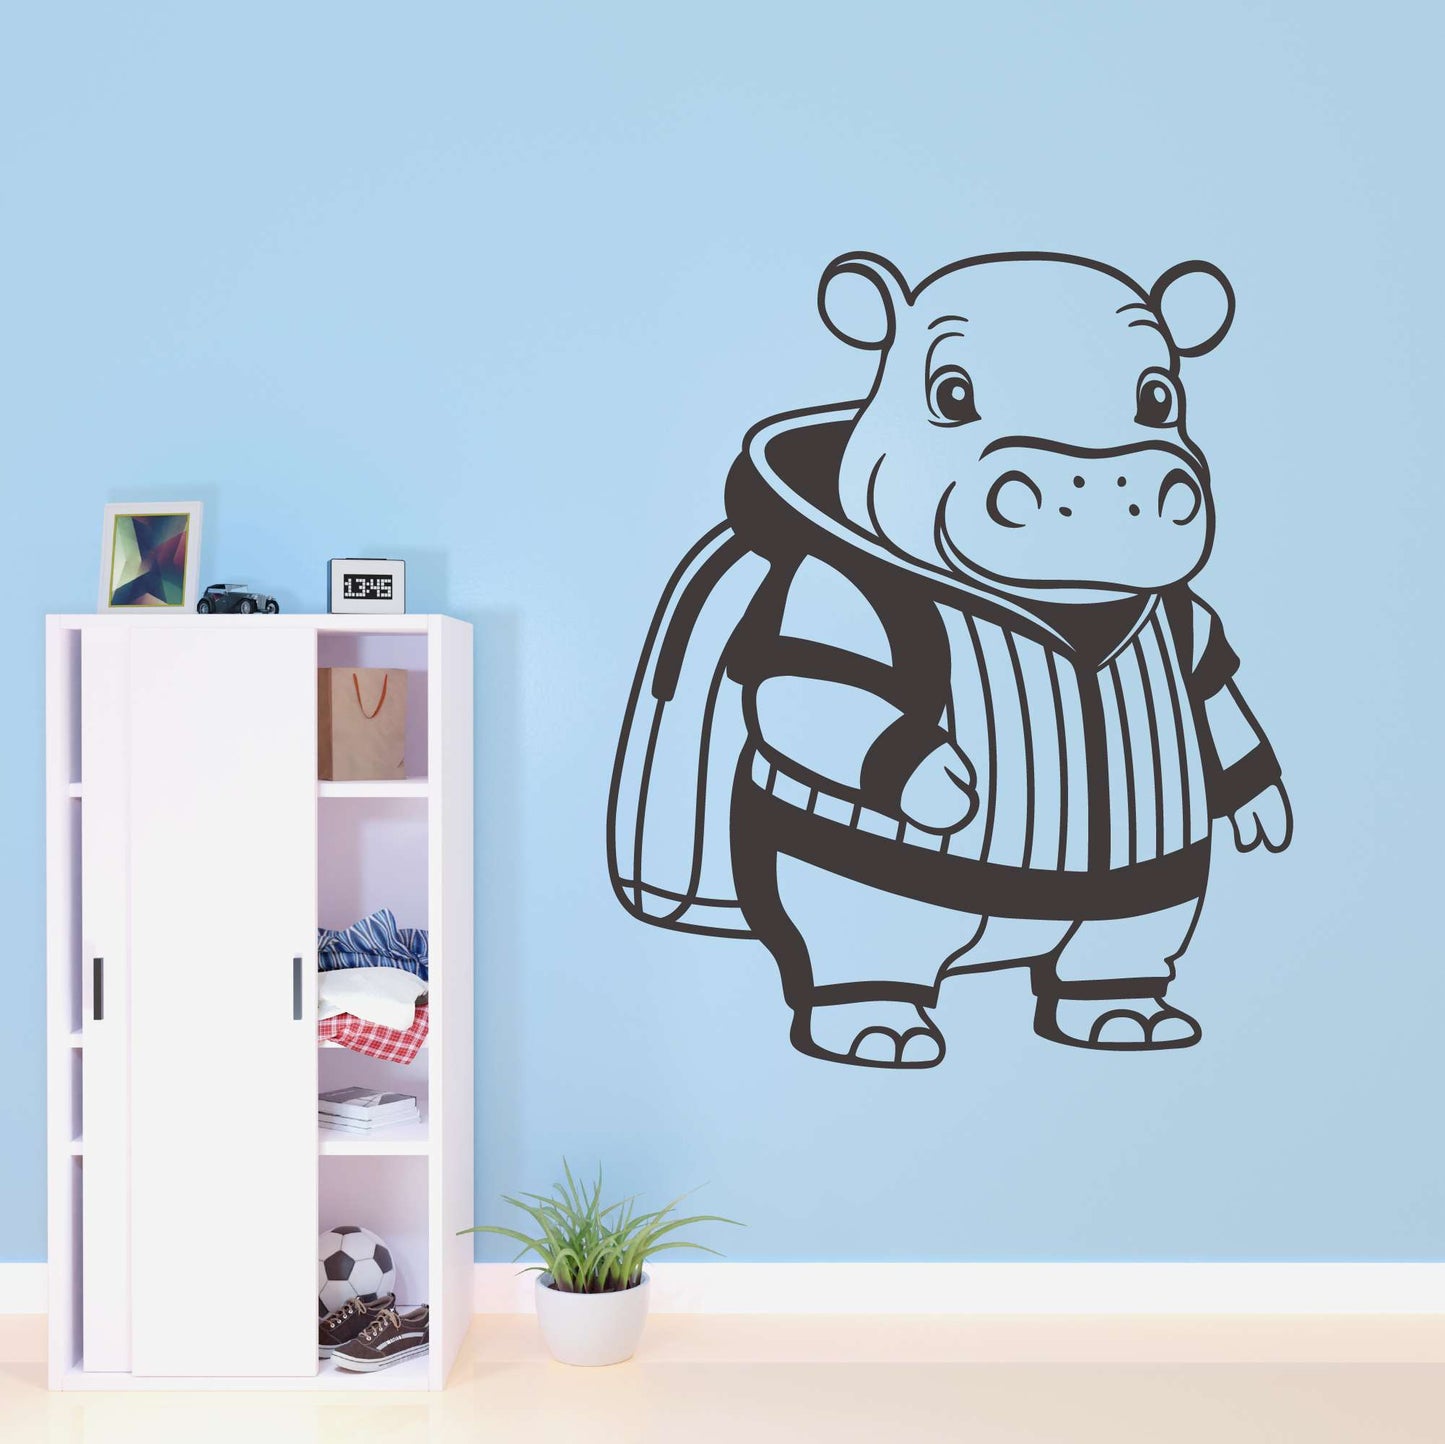 Design With Vinyl Adorable Animal Wall Decal Cute Cartoon Hippo Silhouette Kids Room Design